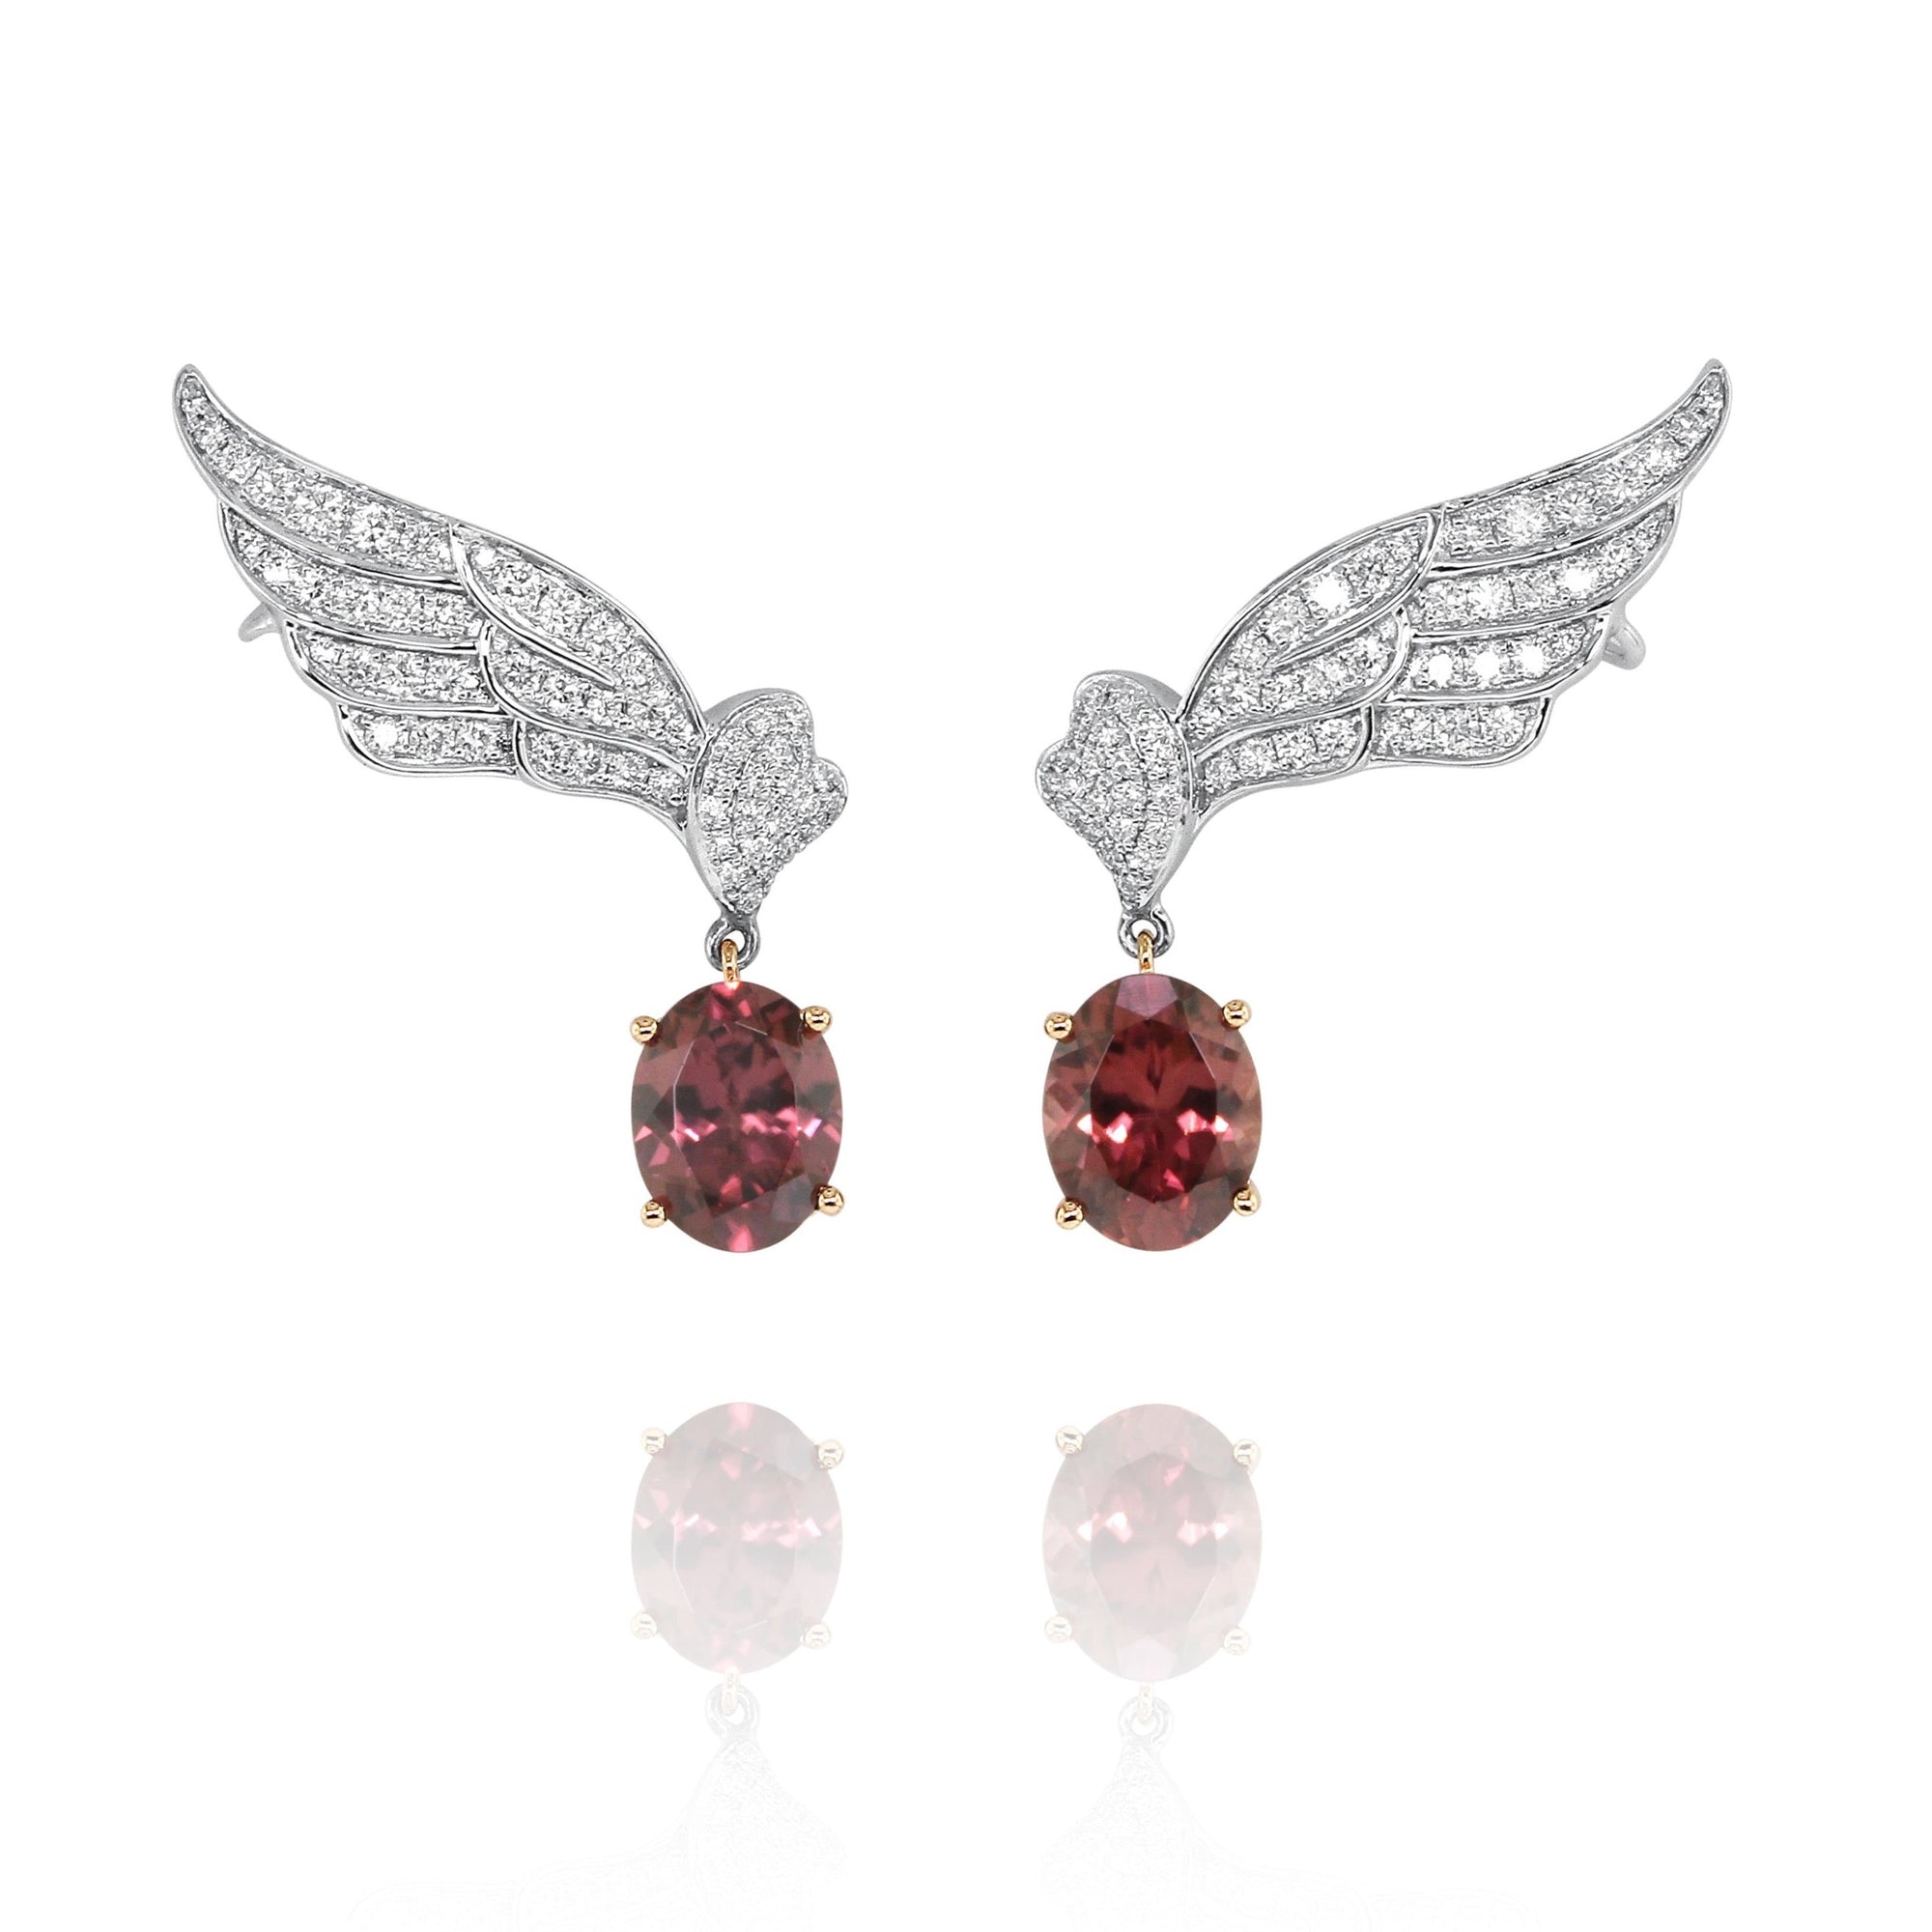 Garnet & Diamond Wing Earrings by Yael available at Talisman Collection Fine Jewelers in El Dorado Hills, CA and online. Dramatic and bold, these garnet and diamond wing earrings feature 5.92 cts of oval garnets set in 18k rose gold, dangling from wings encrusted with 0.91cts of sparkling round brilliant diamonds, set in 18k white gold. A classic motif with an edgy update, these earrings will make a fabulous addition to your jewelry wardrobe.